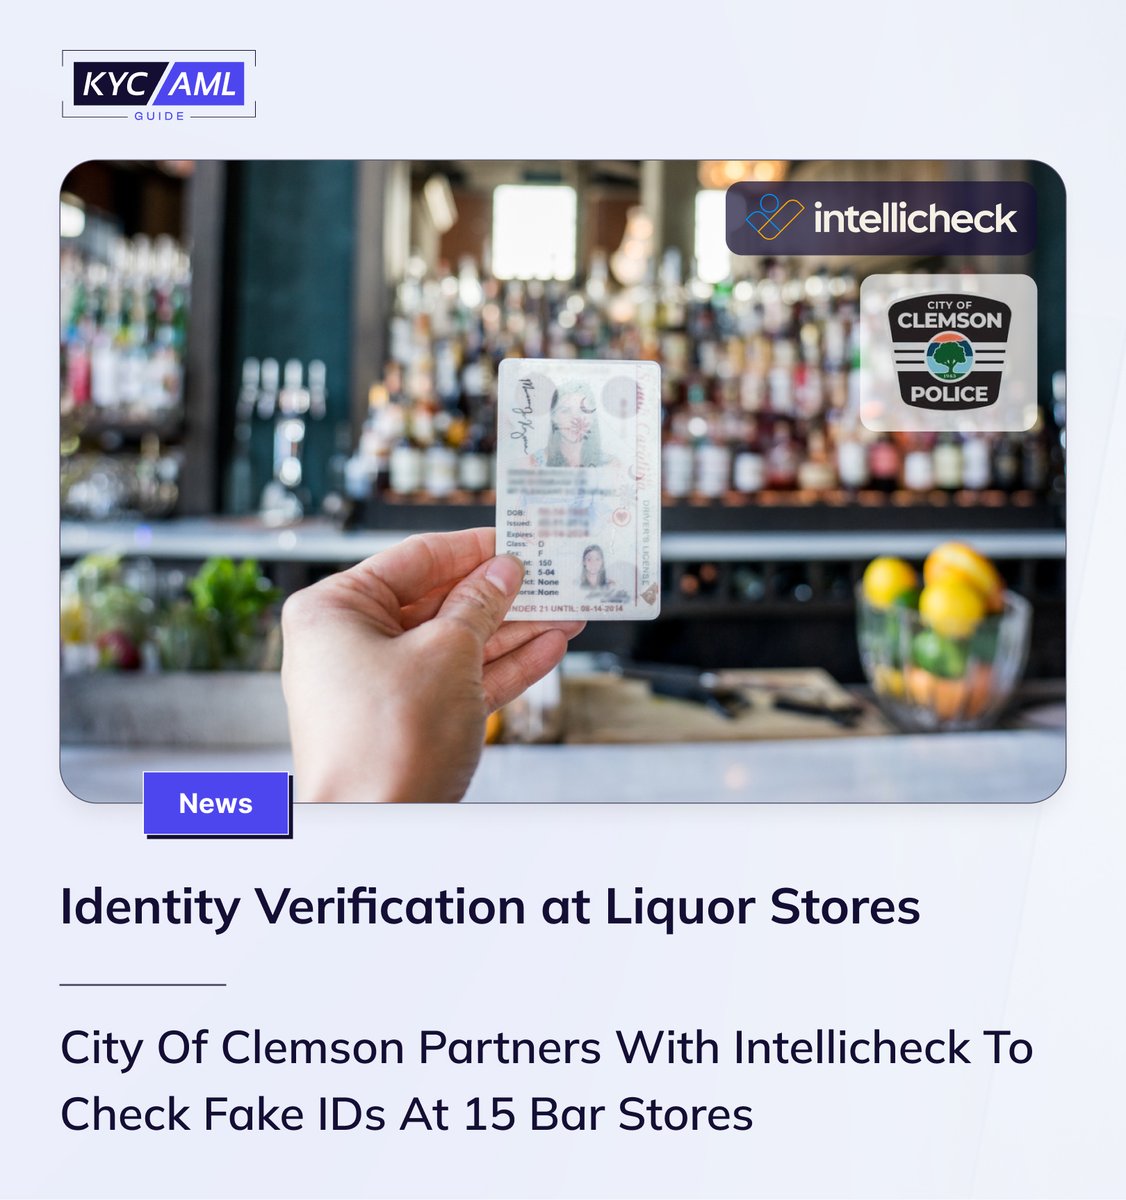 @CityofClemson partners with @IDNIntellicheck to implement an identity verification solution in 15 bars to combat underage drinking.
#IdentityVerification #KYC